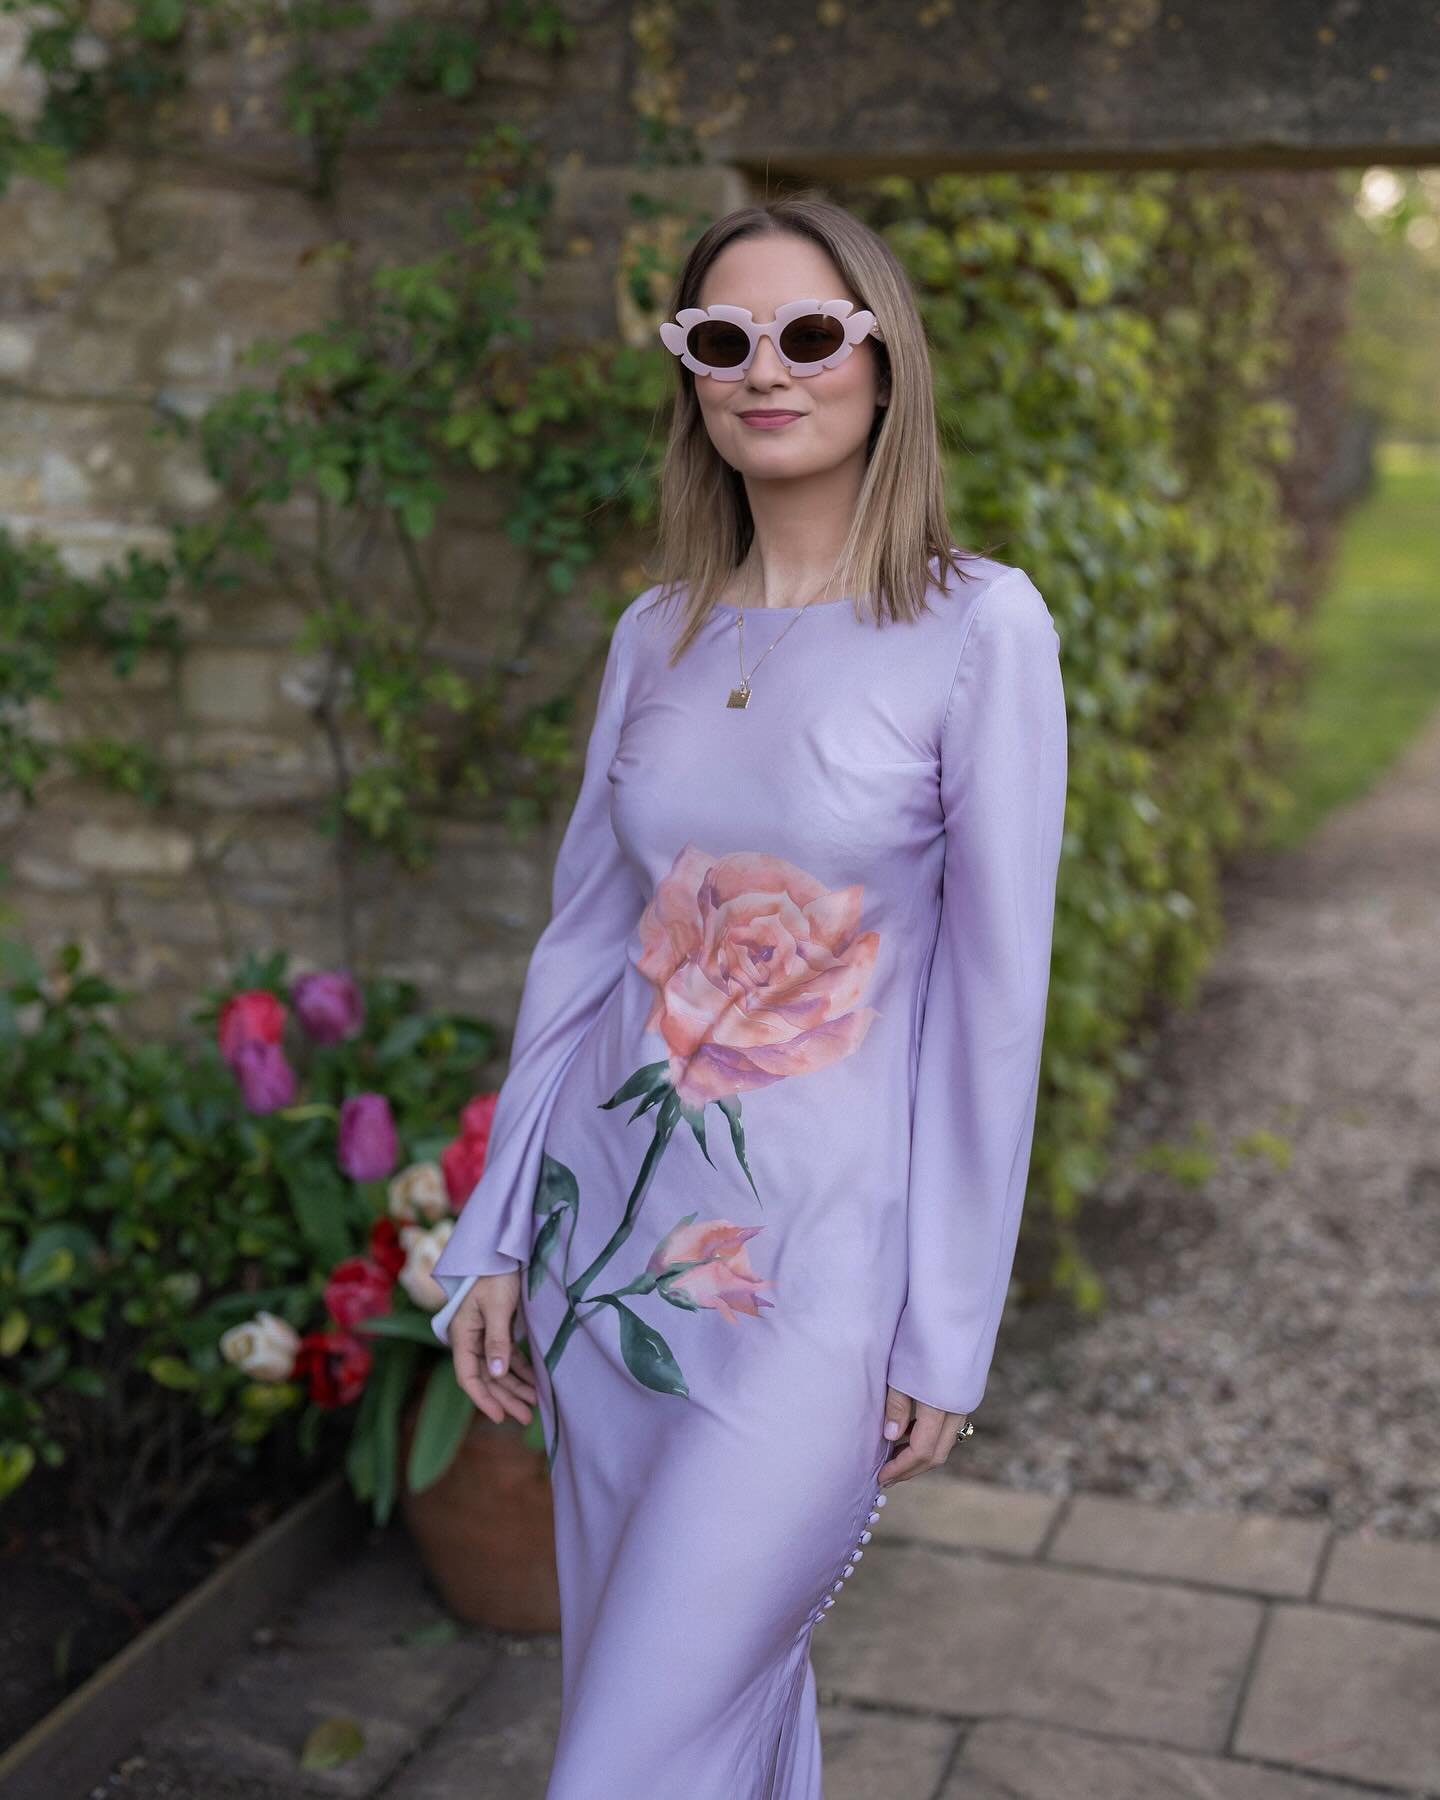 A Spring Soir&eacute;e and Sleepover at the beautiful @lucknam_park, celebrating the launch of their enchanting new Walled Garden Restaurant with one of my besties, @beatysav 🥂

A special shout out to my Ada Dakin dress, 100% crafted from sustainabl